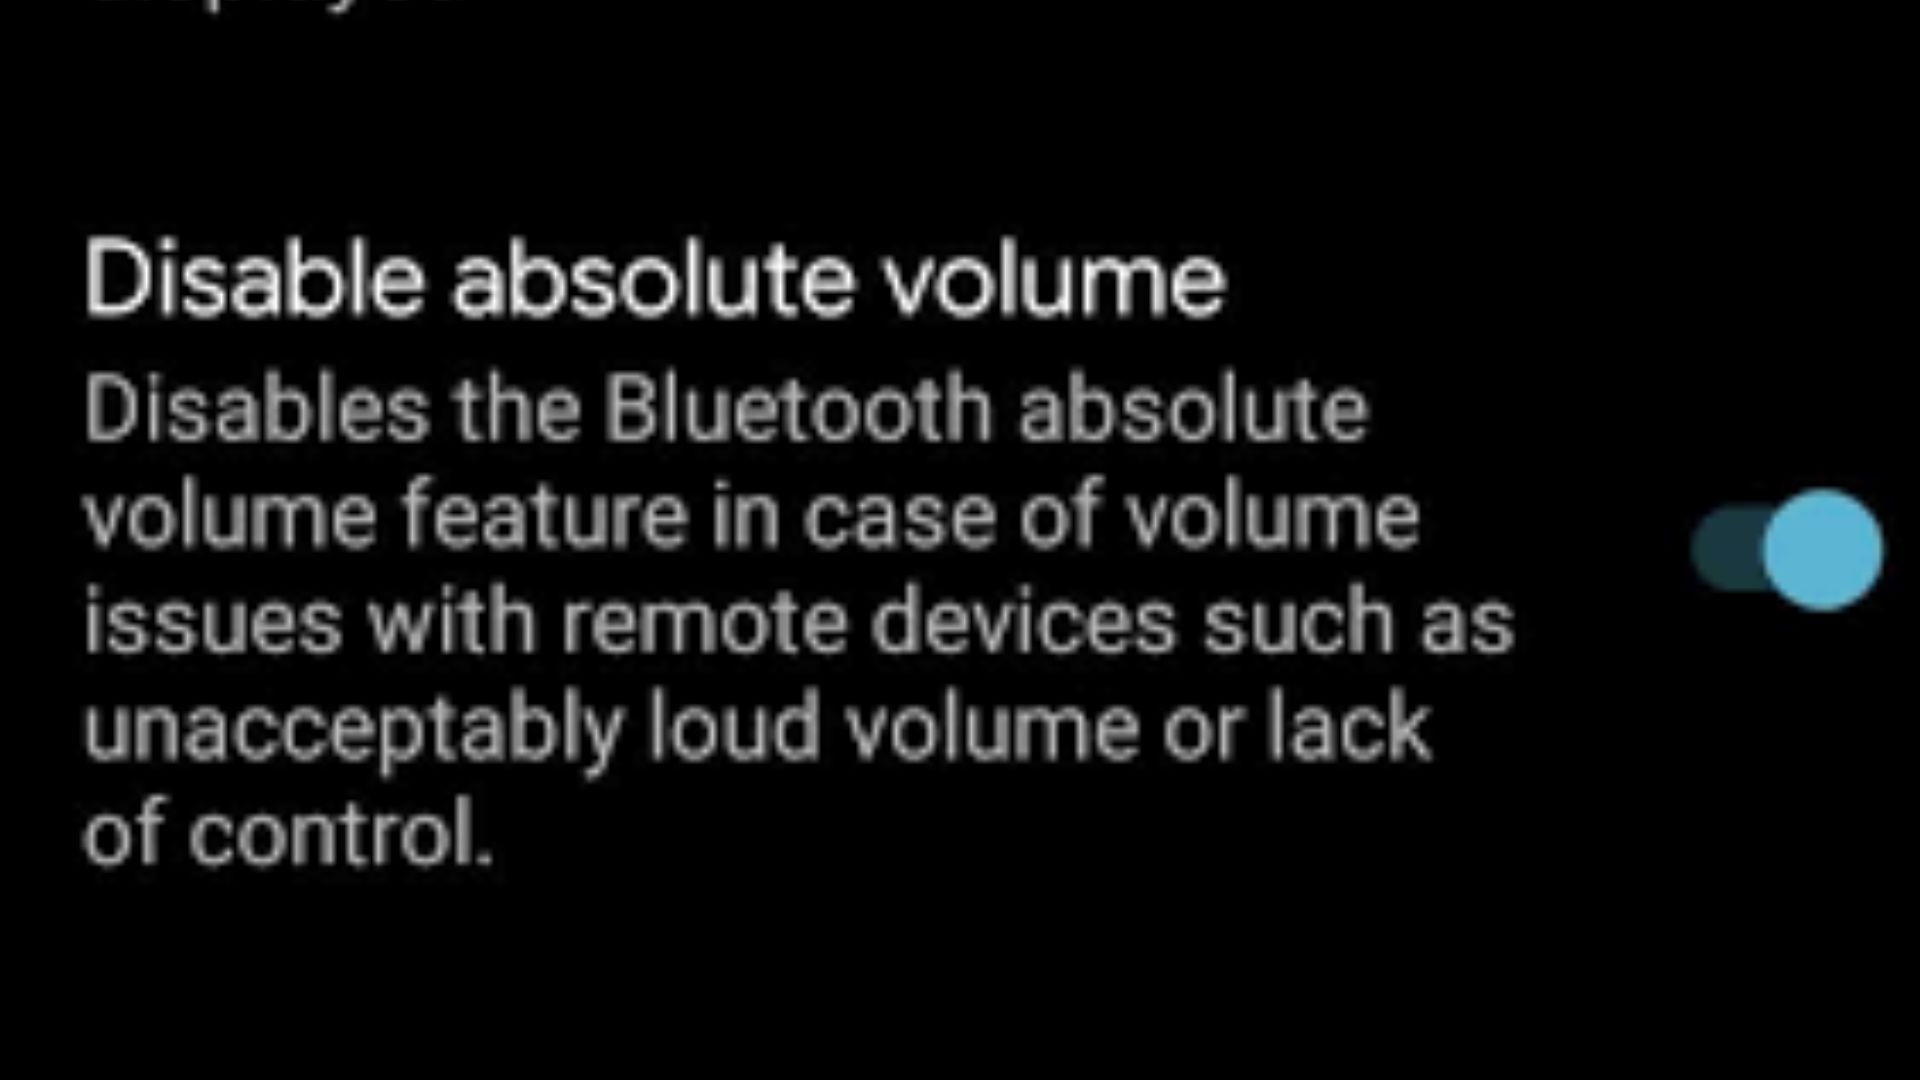 How To Disable Bluetooth Absolute Volume On Android?